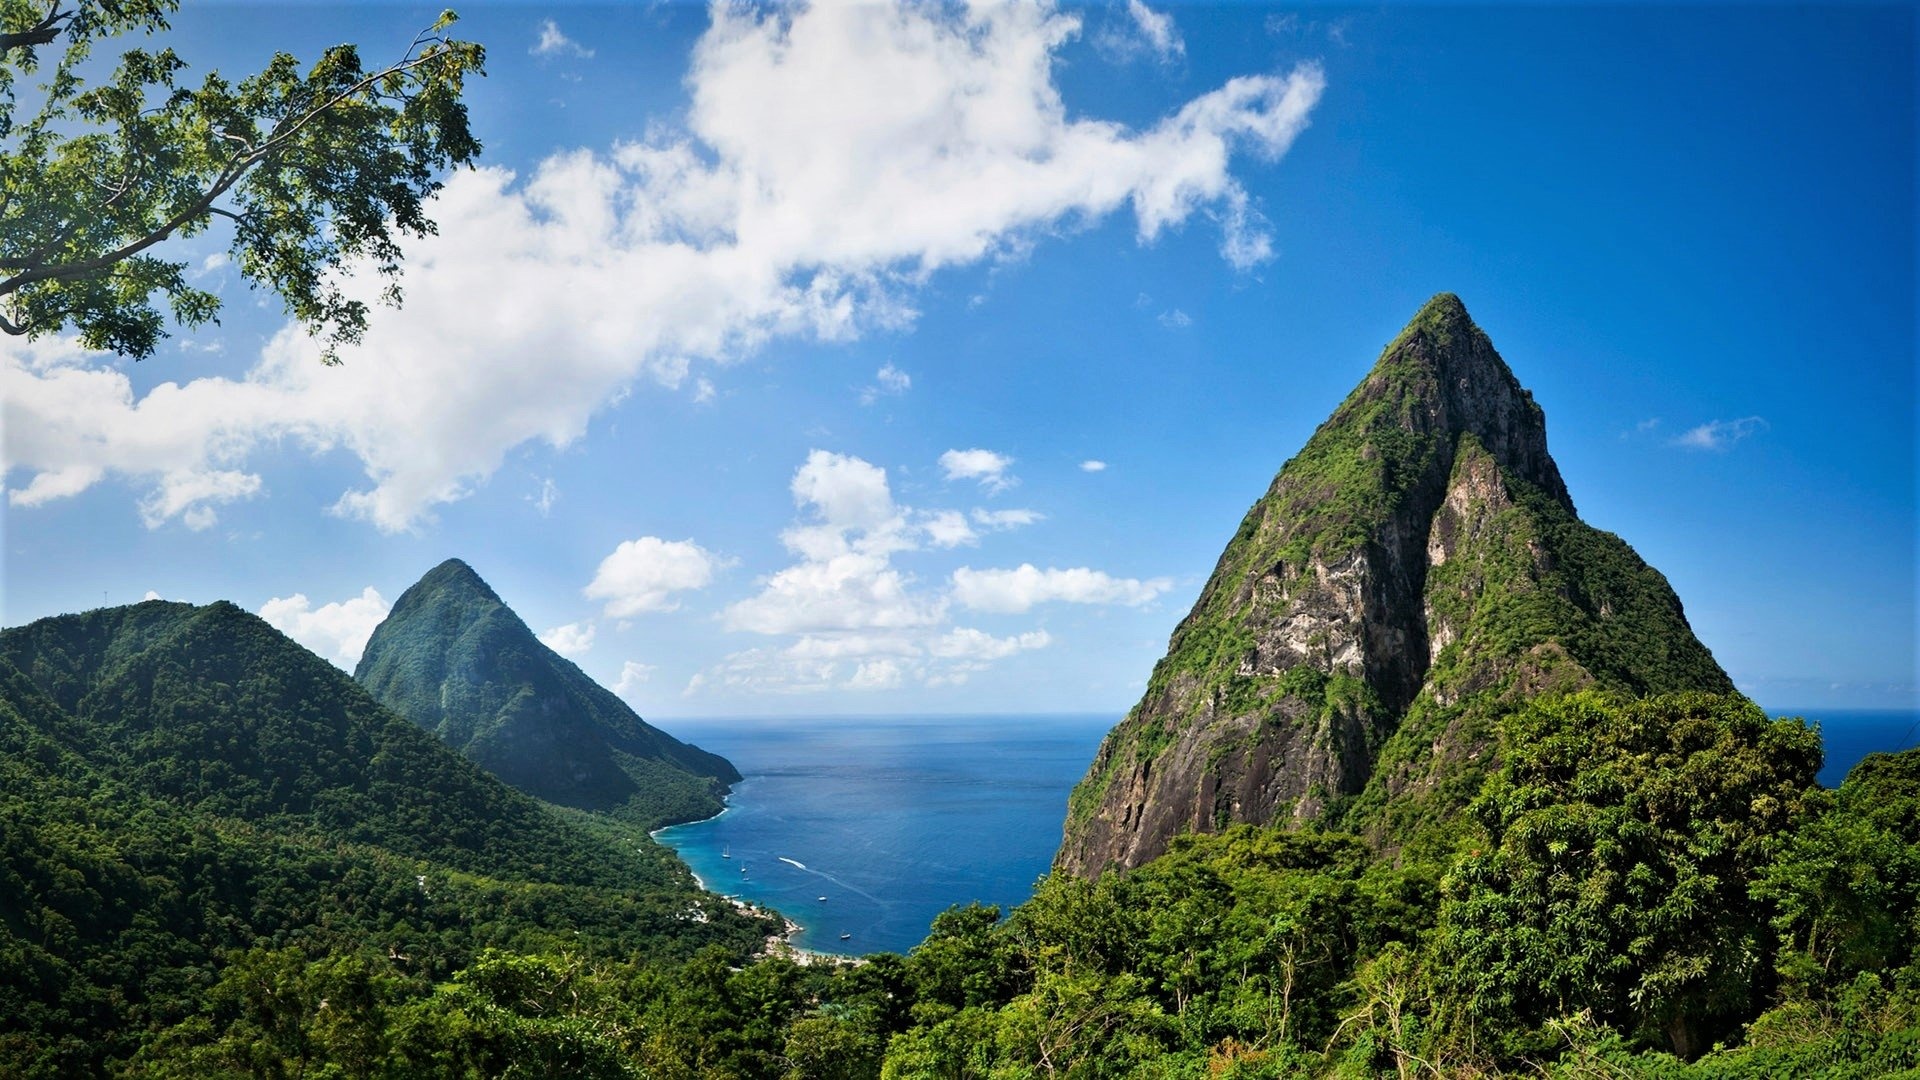 Saint Lucia, HD wallpapers, Background images, Travel, 1920x1080 Full HD Desktop